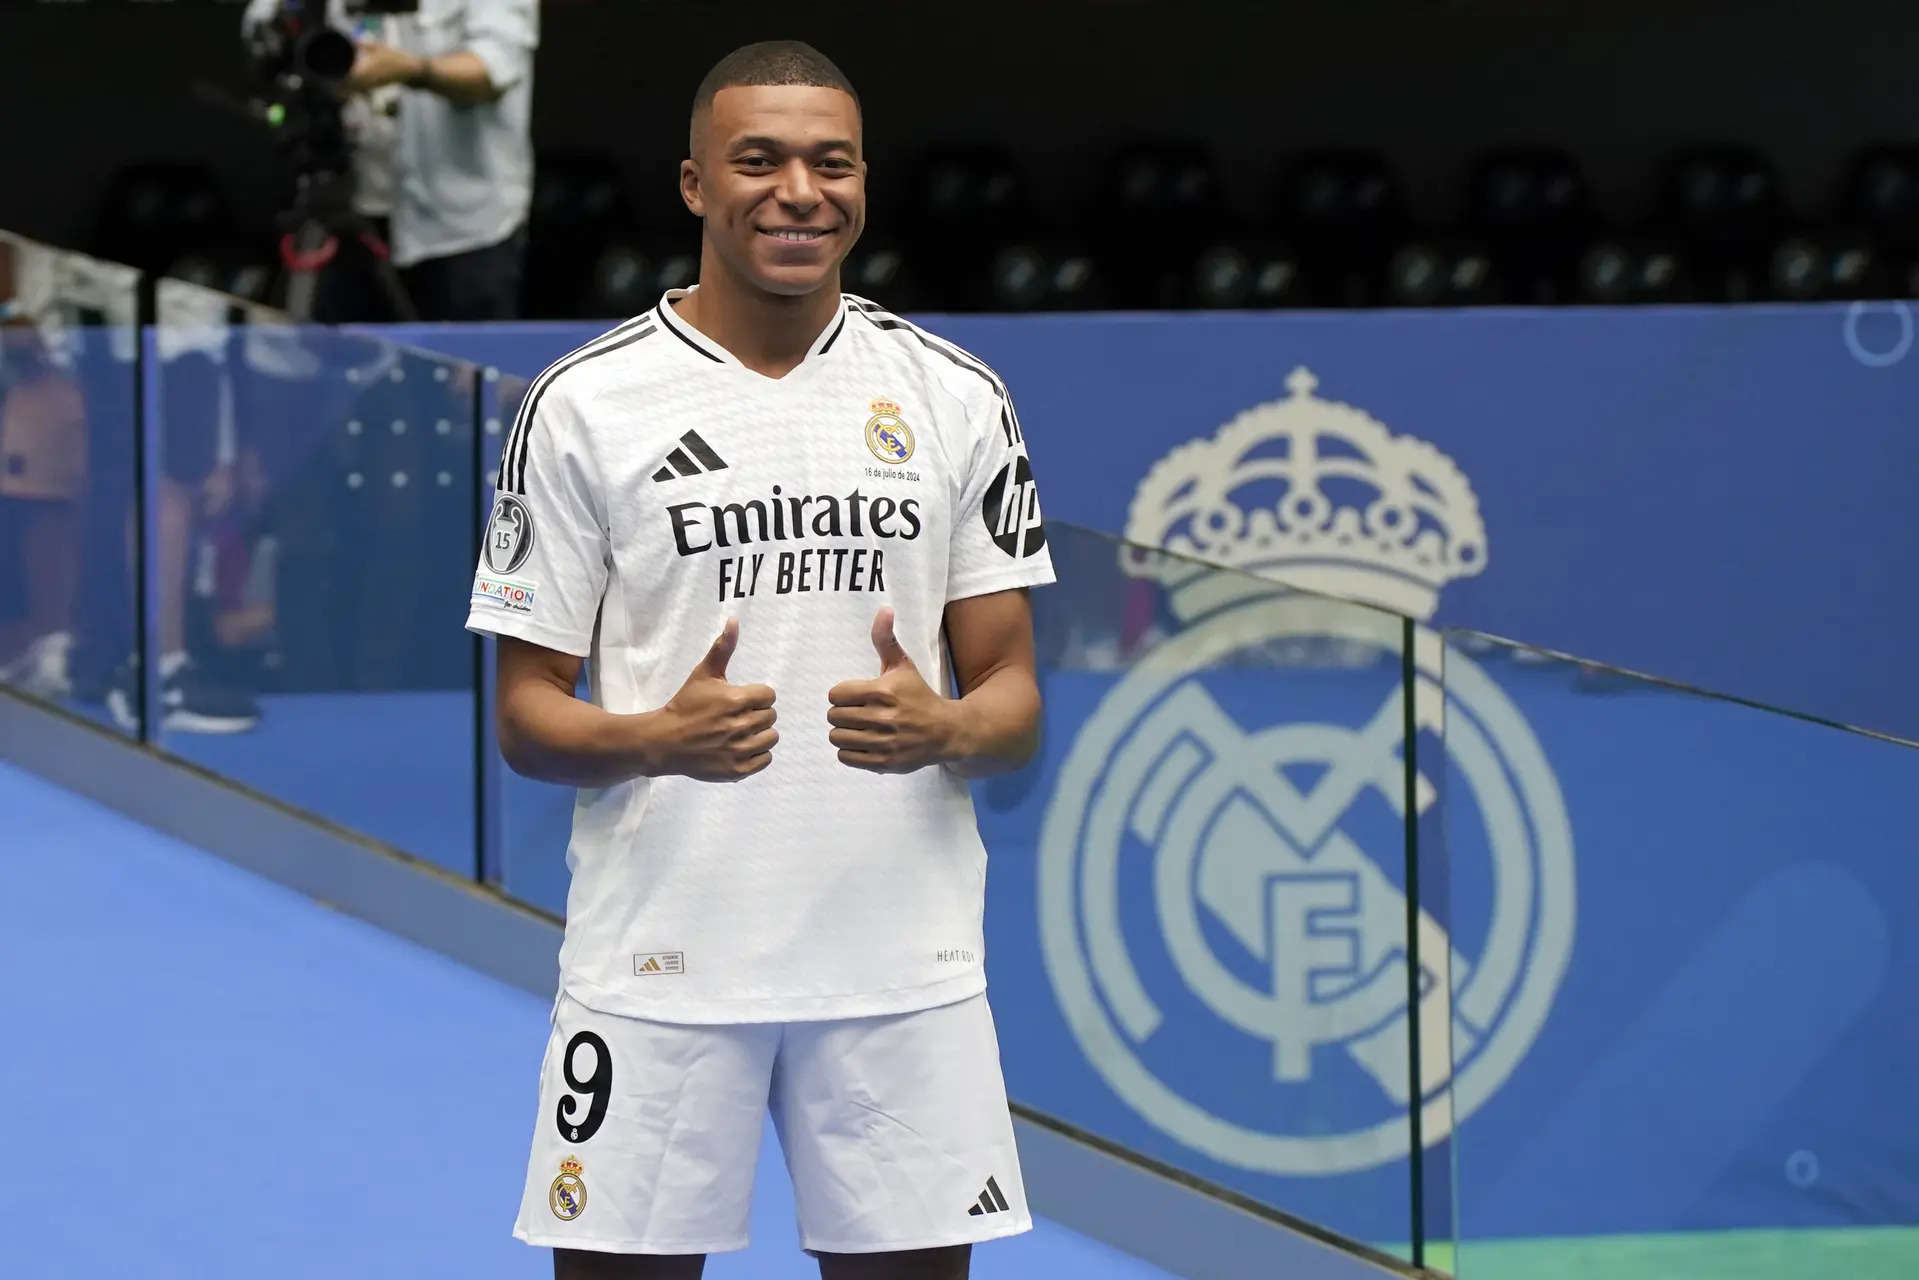 Kylian Mbappe's unveiling as Real Madrid player sees 85,000 fans cheering for him 